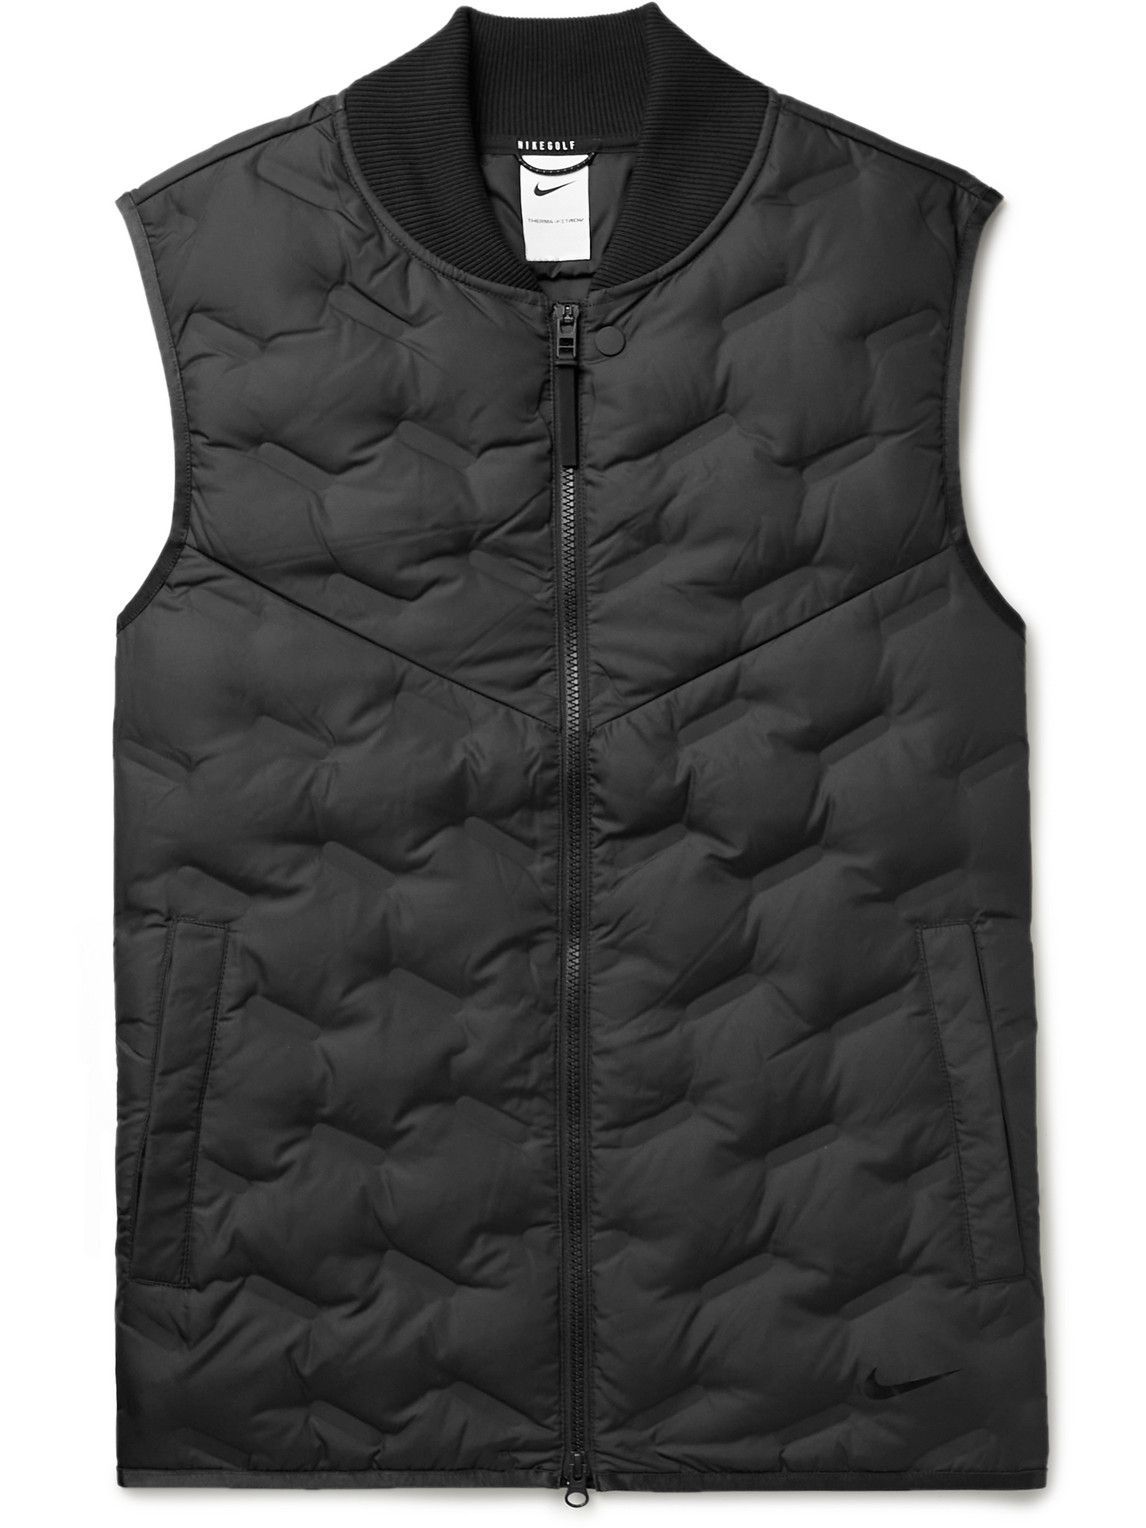 Nike Golf - Repel Quilted Therma-FIT ADV Down Golf Gilet - Black Nike Golf